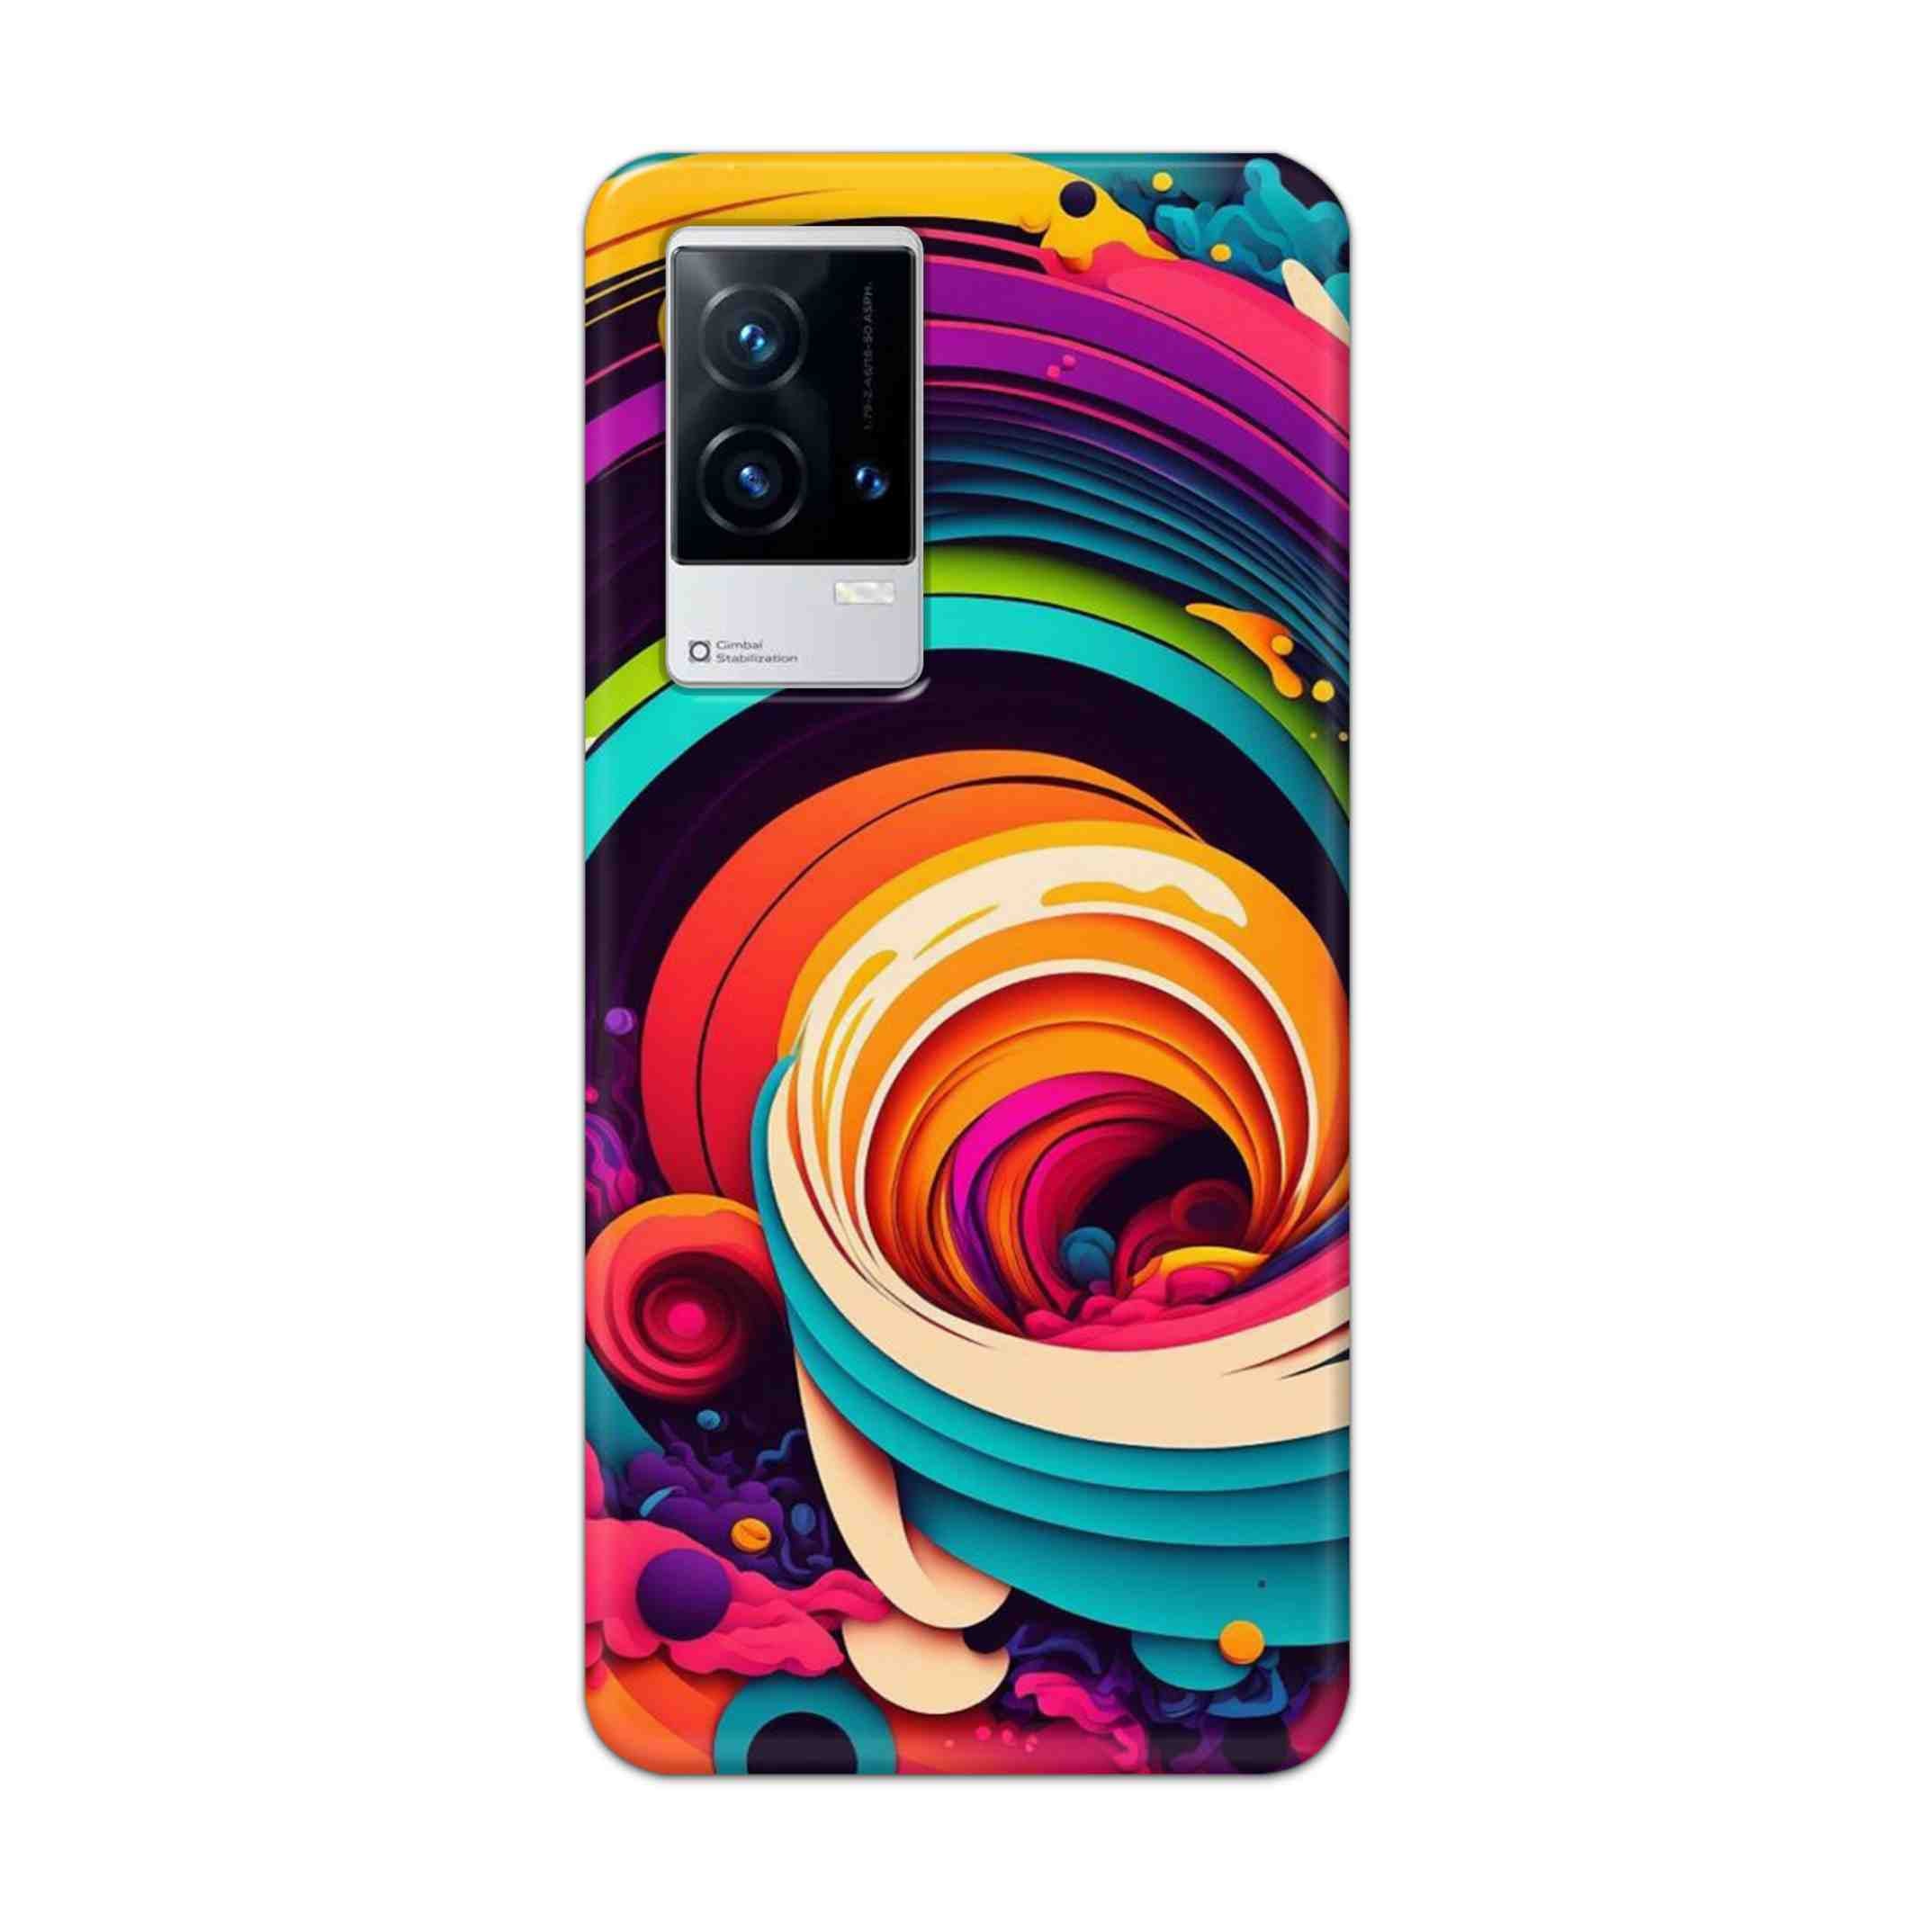 Buy Colour Circle Hard Back Mobile Phone Case Cover For Vivo iQOO 9 5G Online